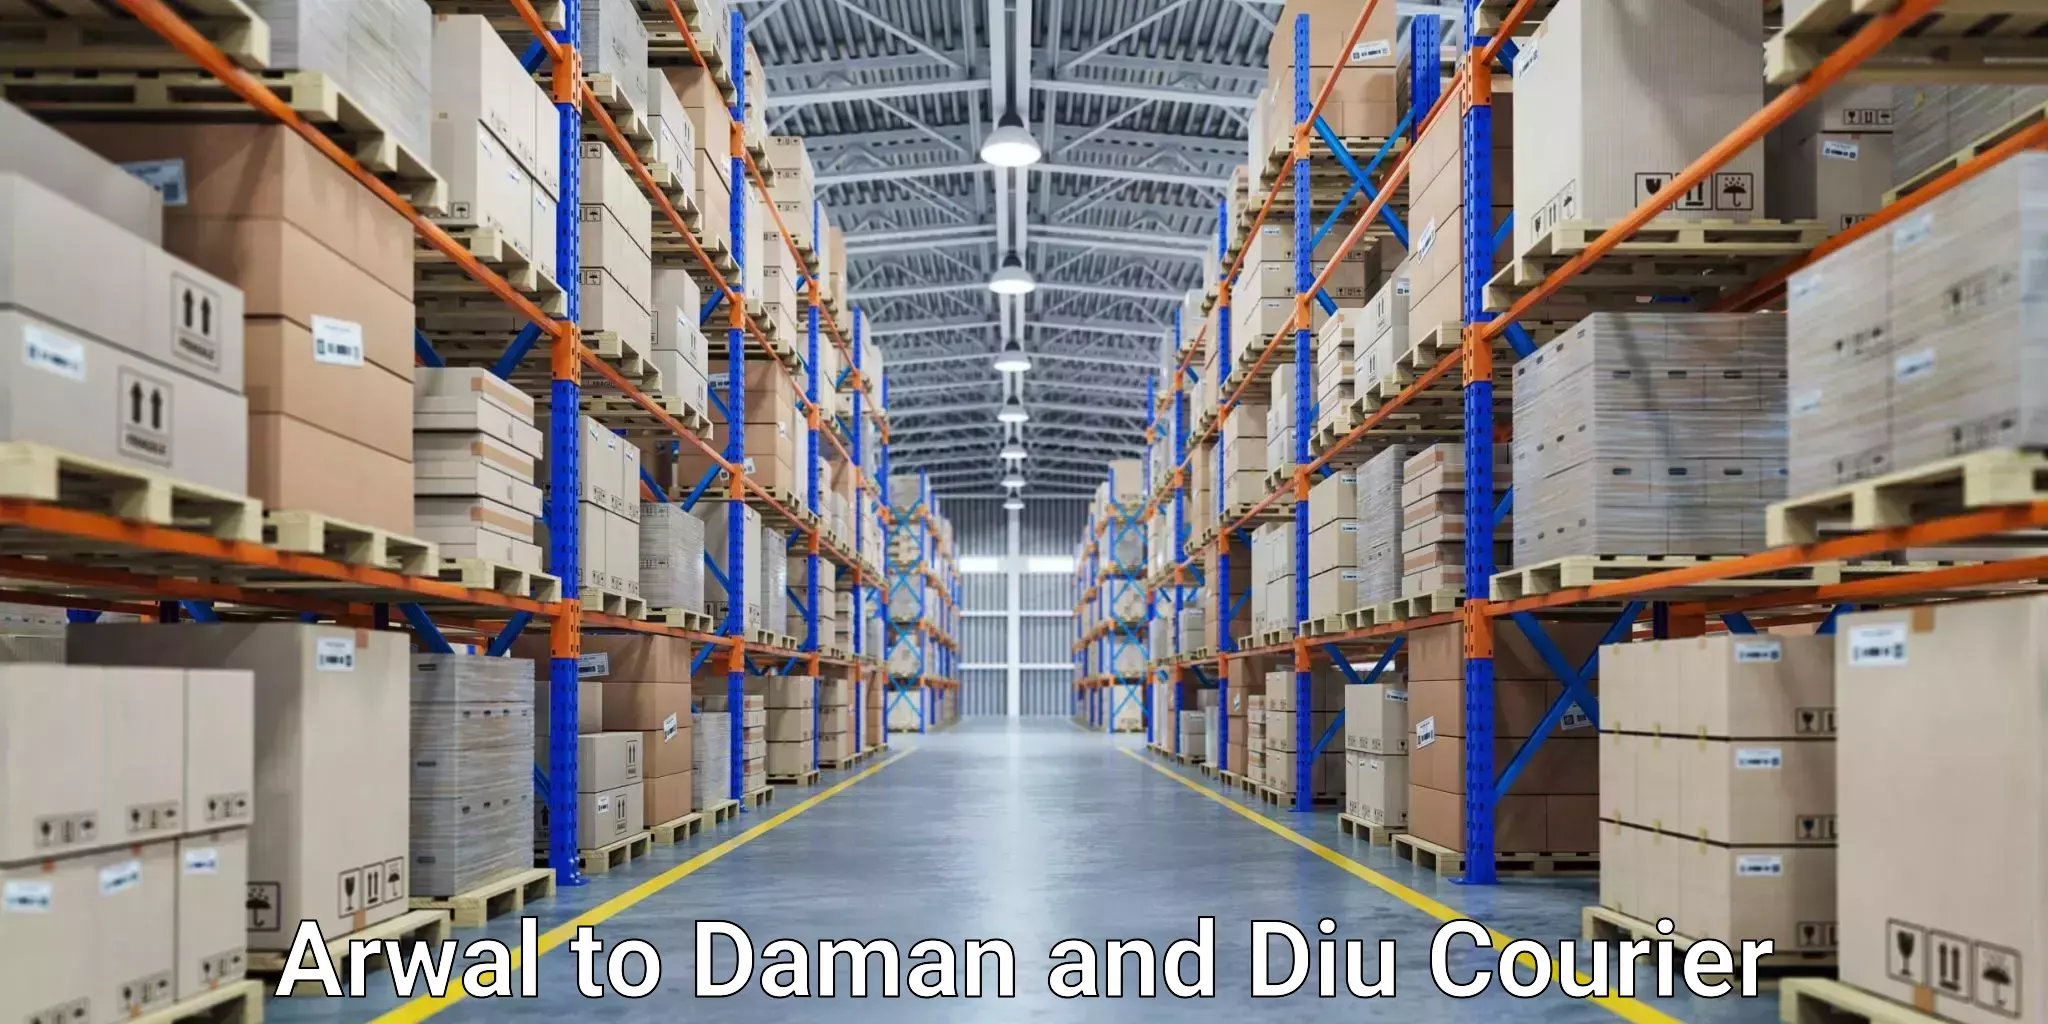 Bulk courier orders Arwal to Daman